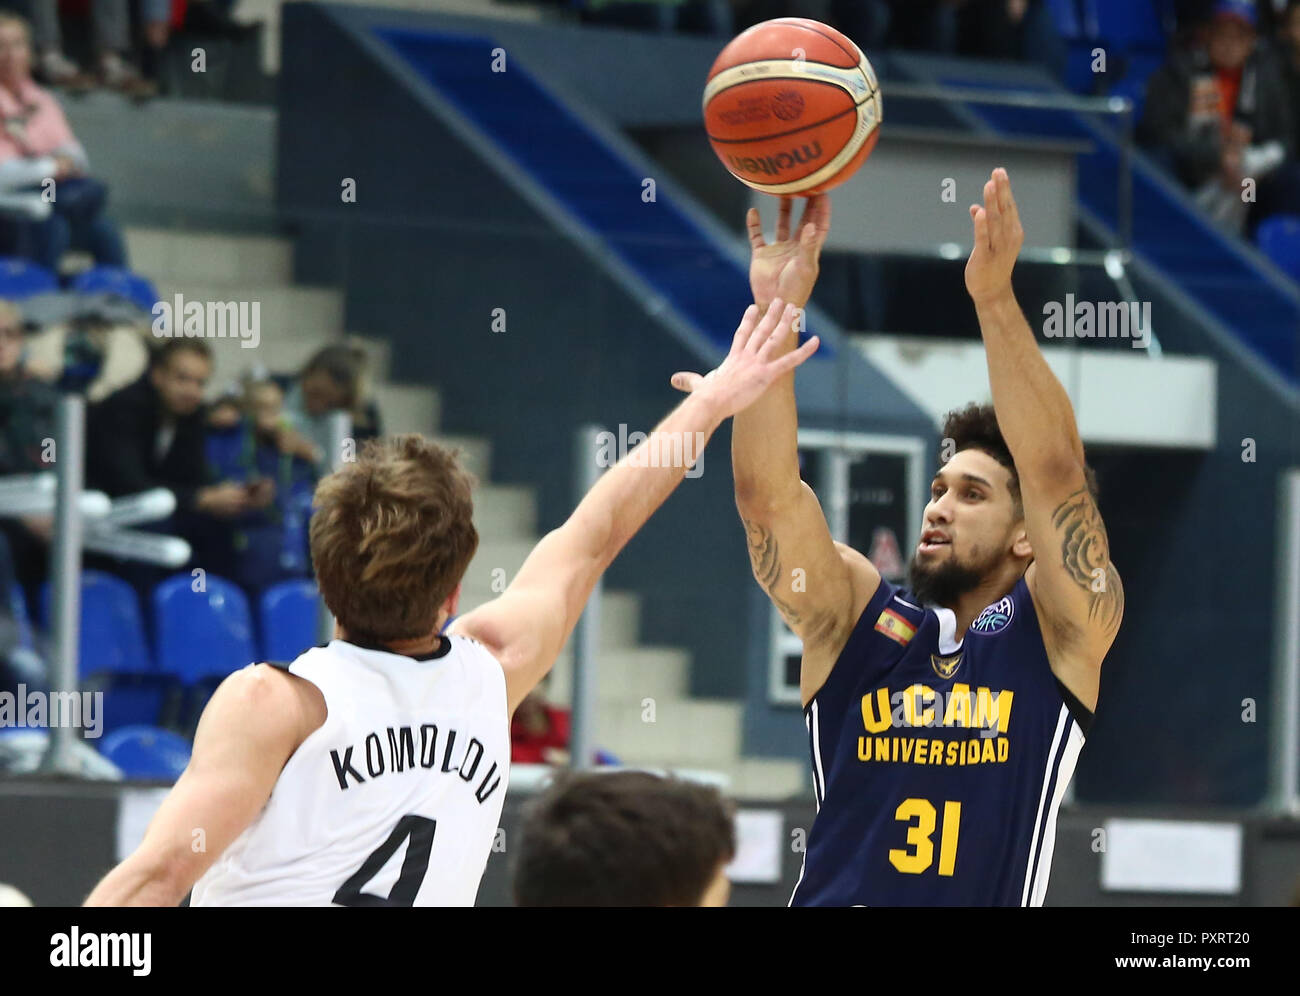 Artem Komolov (BCNN) and Askia Booker (UCAM) seen in action during the  game. Basketball Champions League: BC Nizhny Novgorod (BCNN) from Russia vs  Ucam Murcia Club Baloncesto (UCAM) from Spain. The game